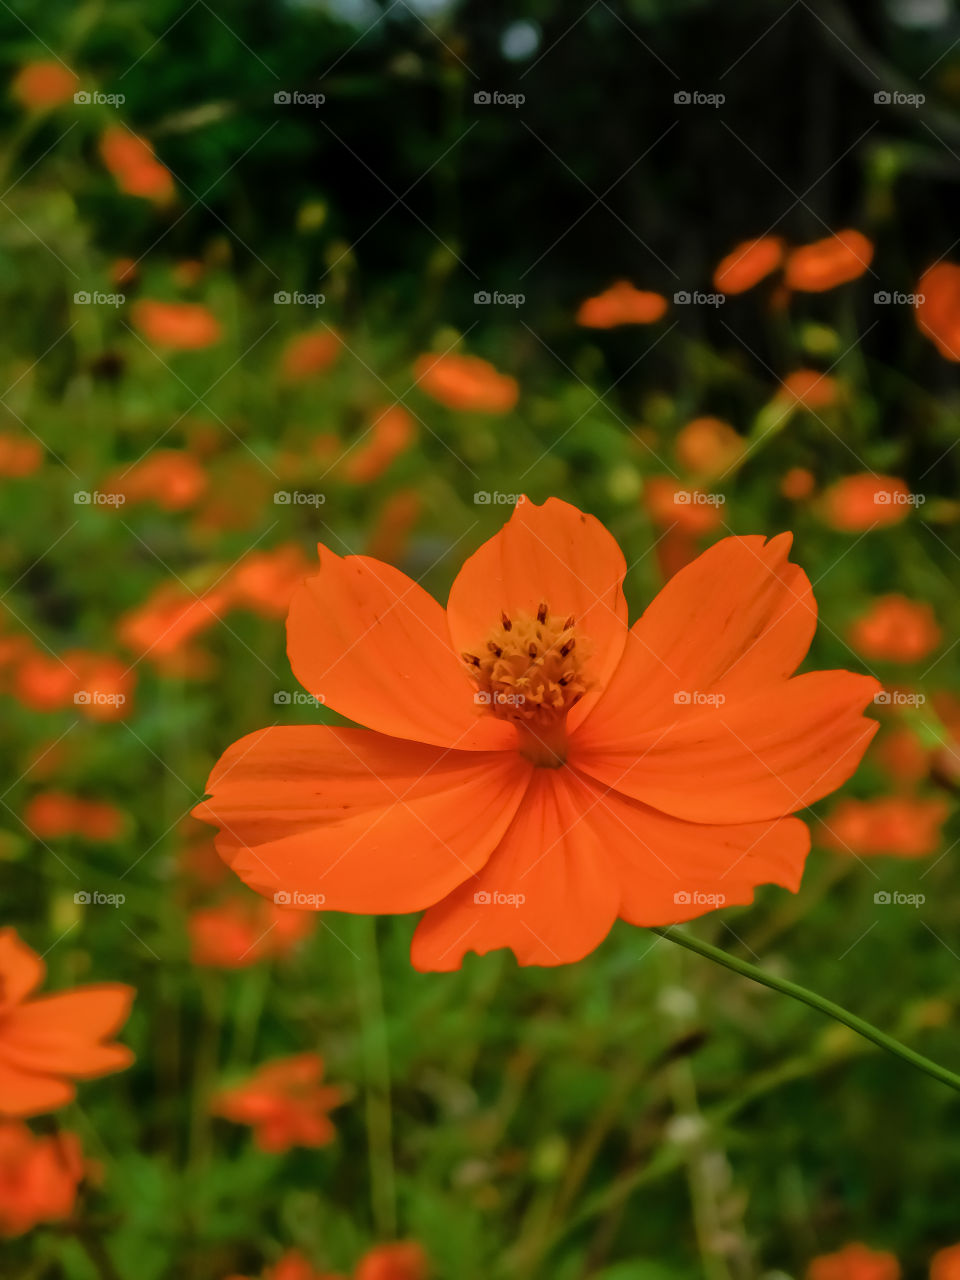 Beauty of orange coloured flower which is growing in Indian soil having flower background looking as a wallpaper, attractive.